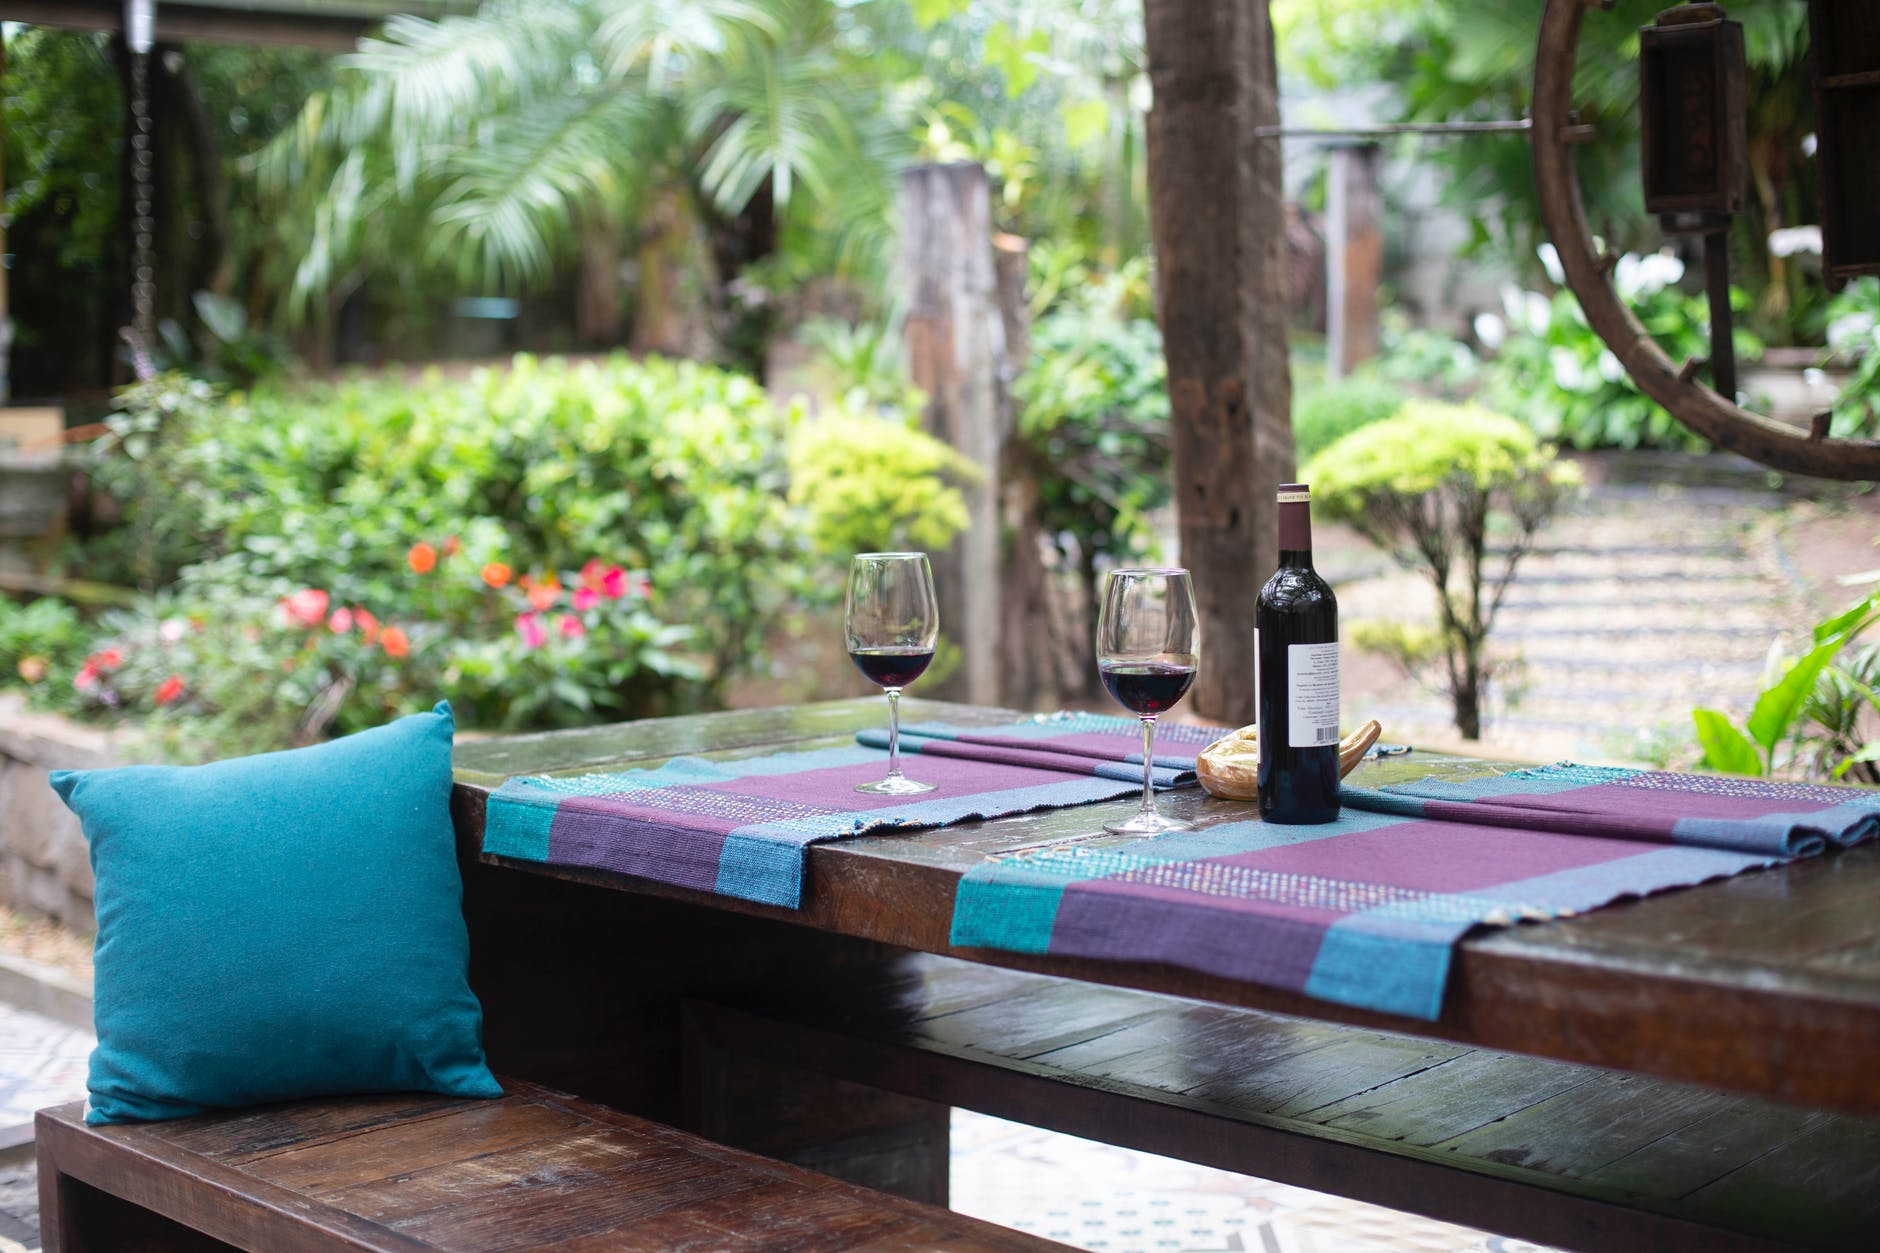 A wooden table with a bottle of wine in a backyard paradise.